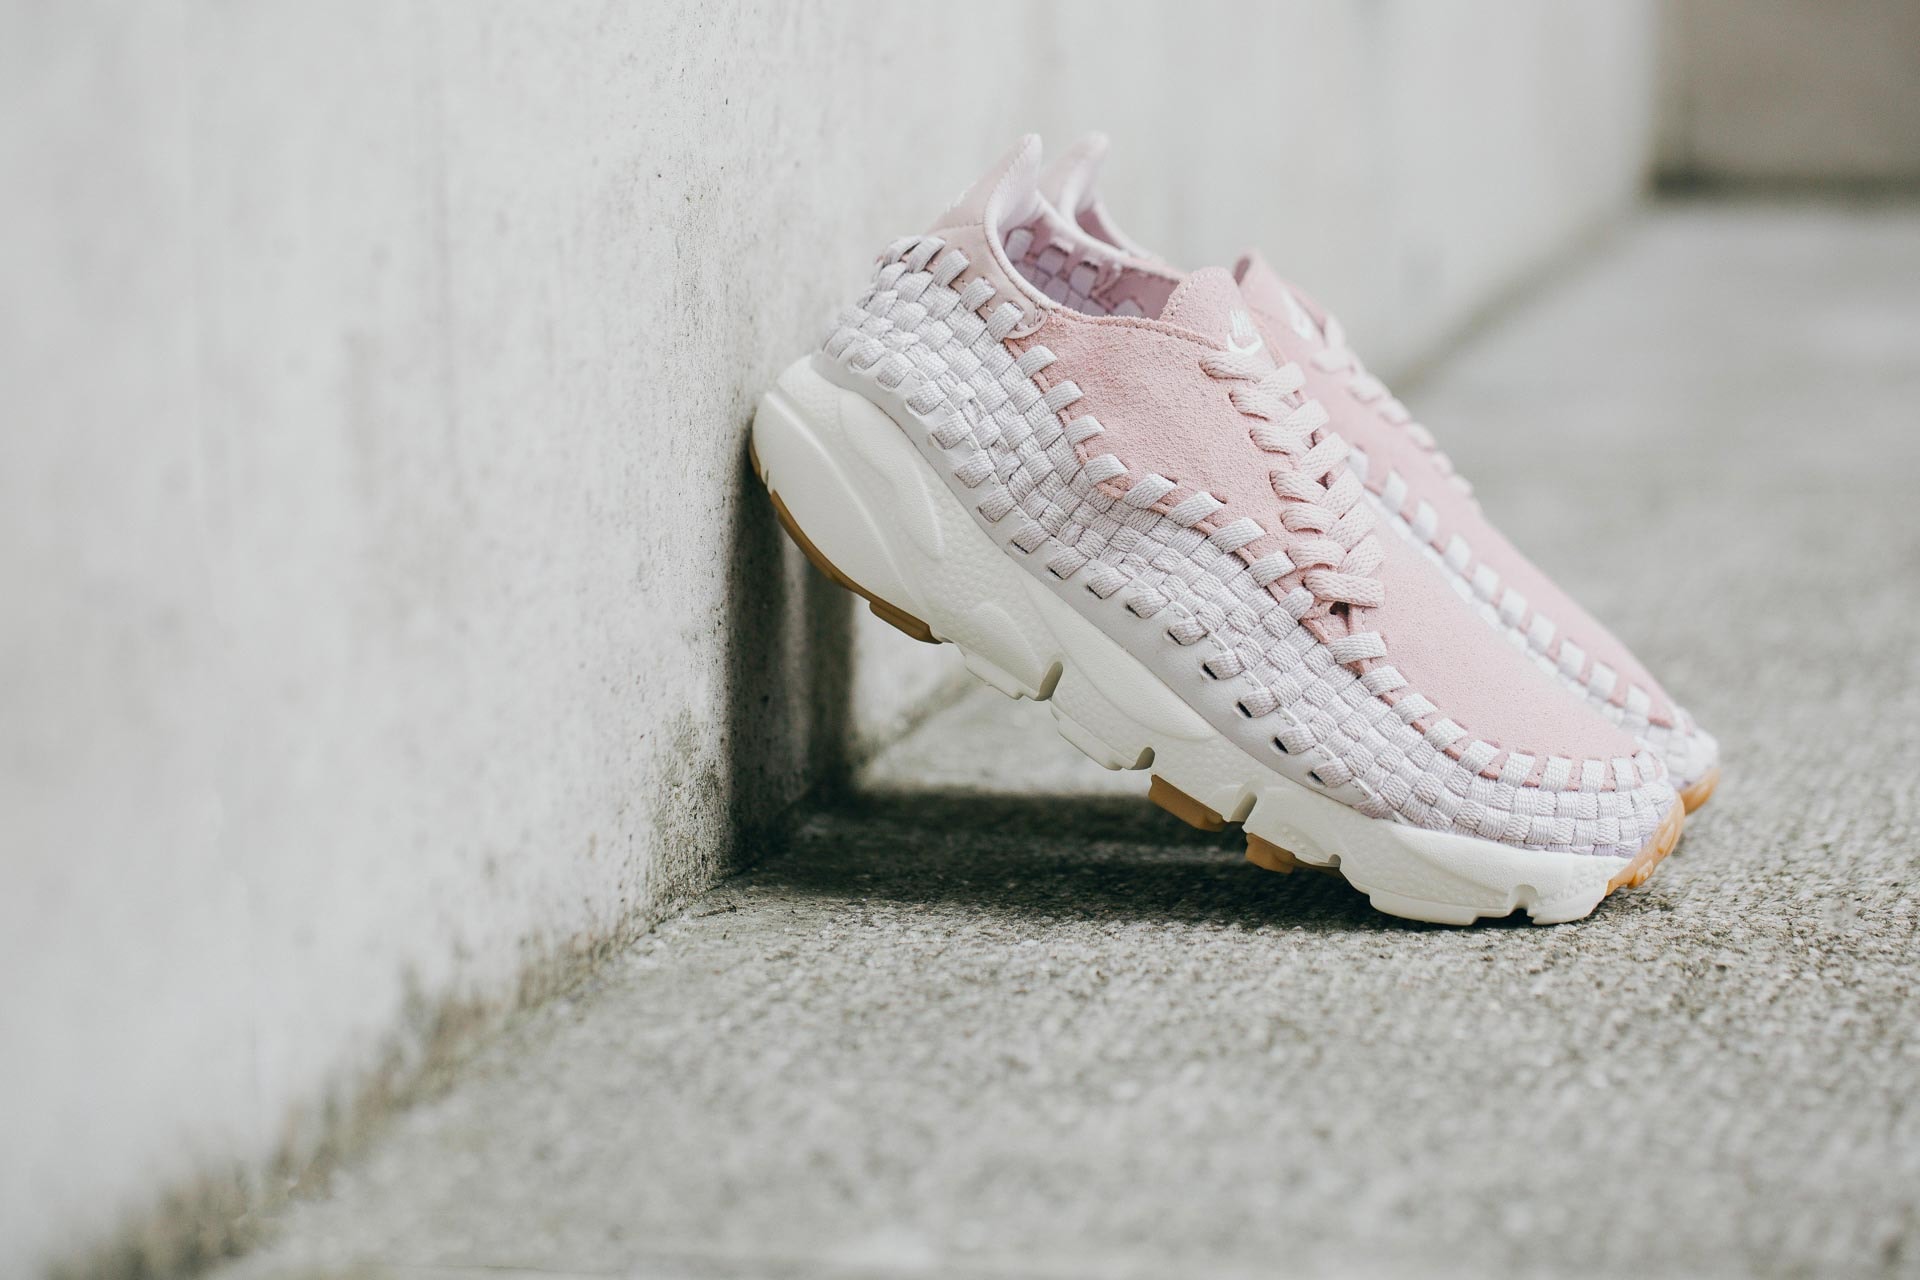 Nike Air Footscape Woven 全新女生專屬配色